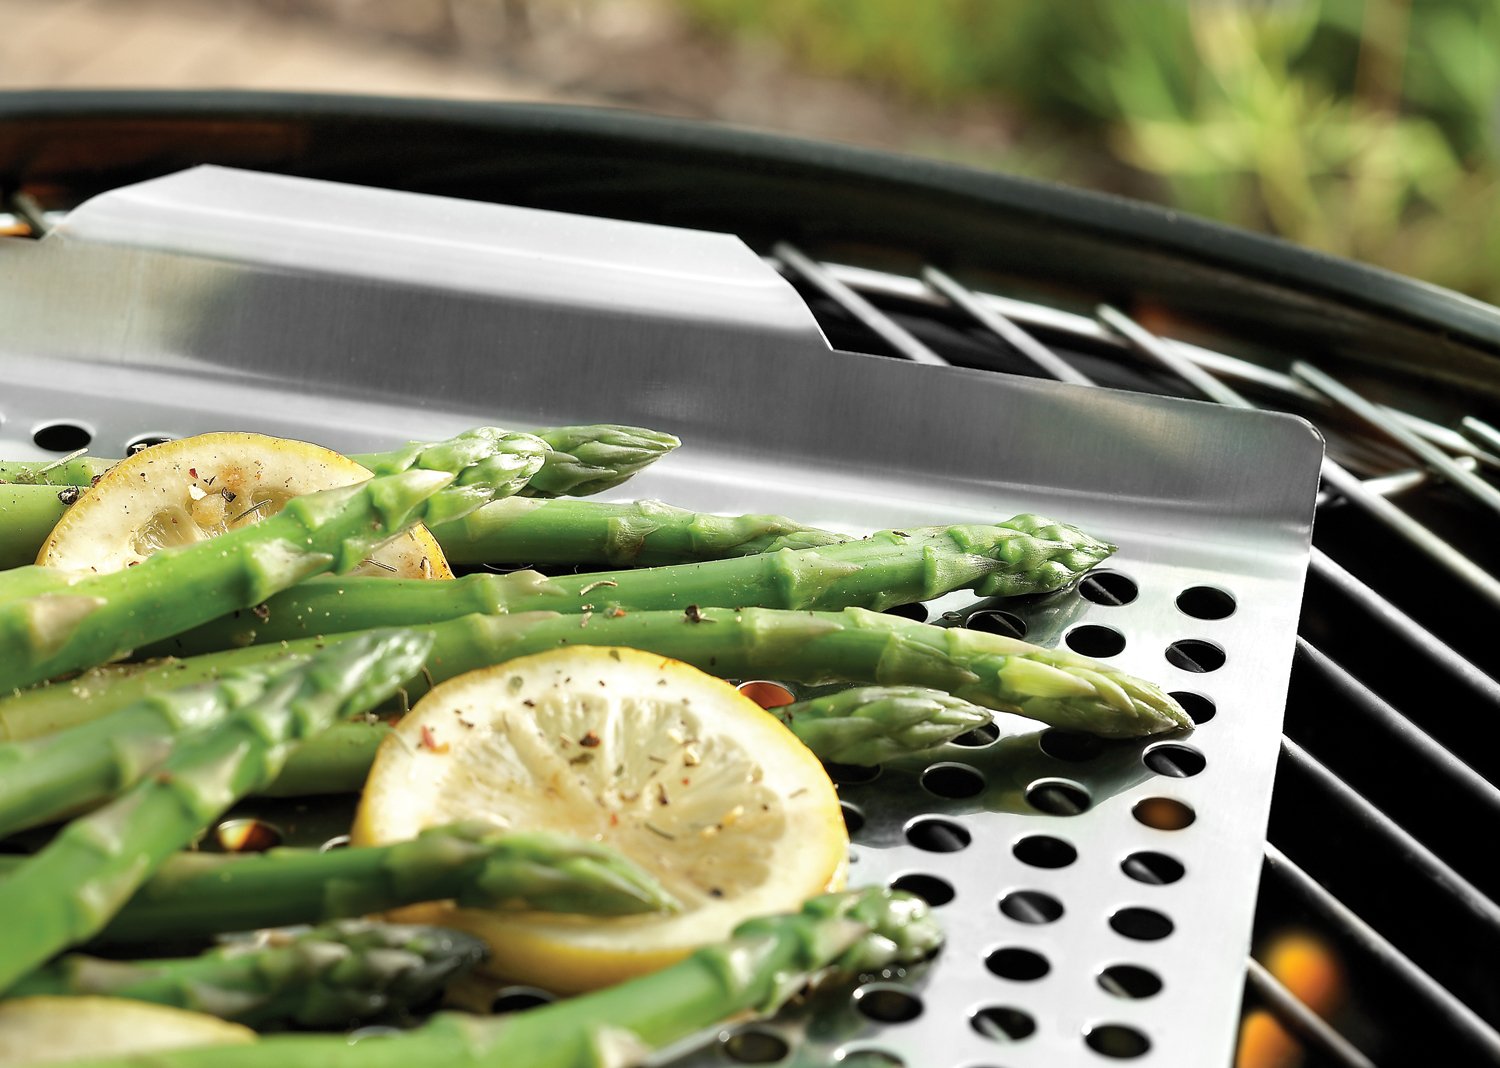 Outset Stainless Steel Grill Grid, 17" x 11"